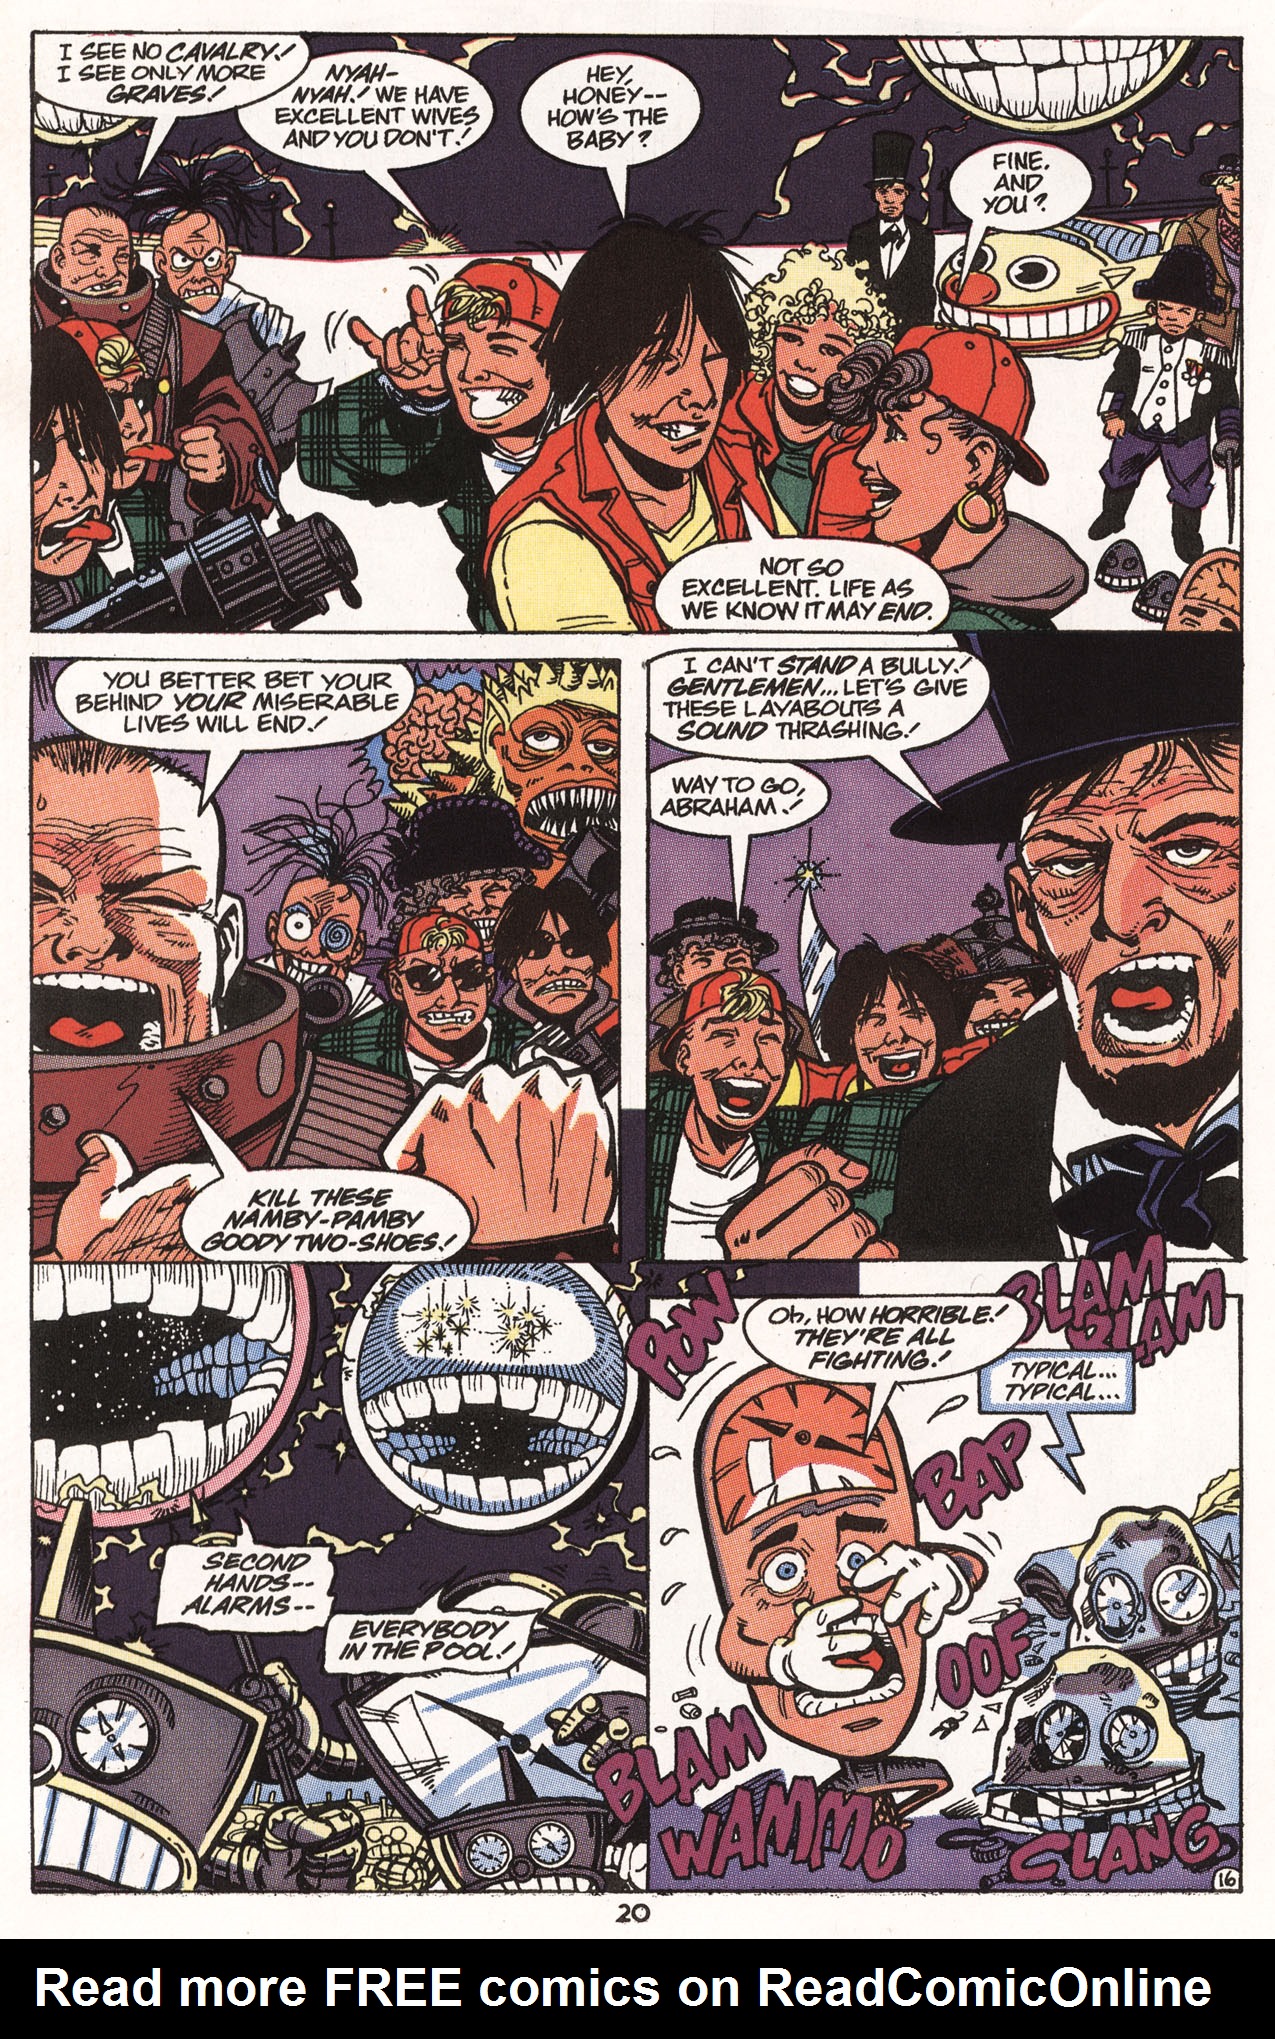 Read online Bill & Ted's Excellent Comic Book comic -  Issue #7 - 22